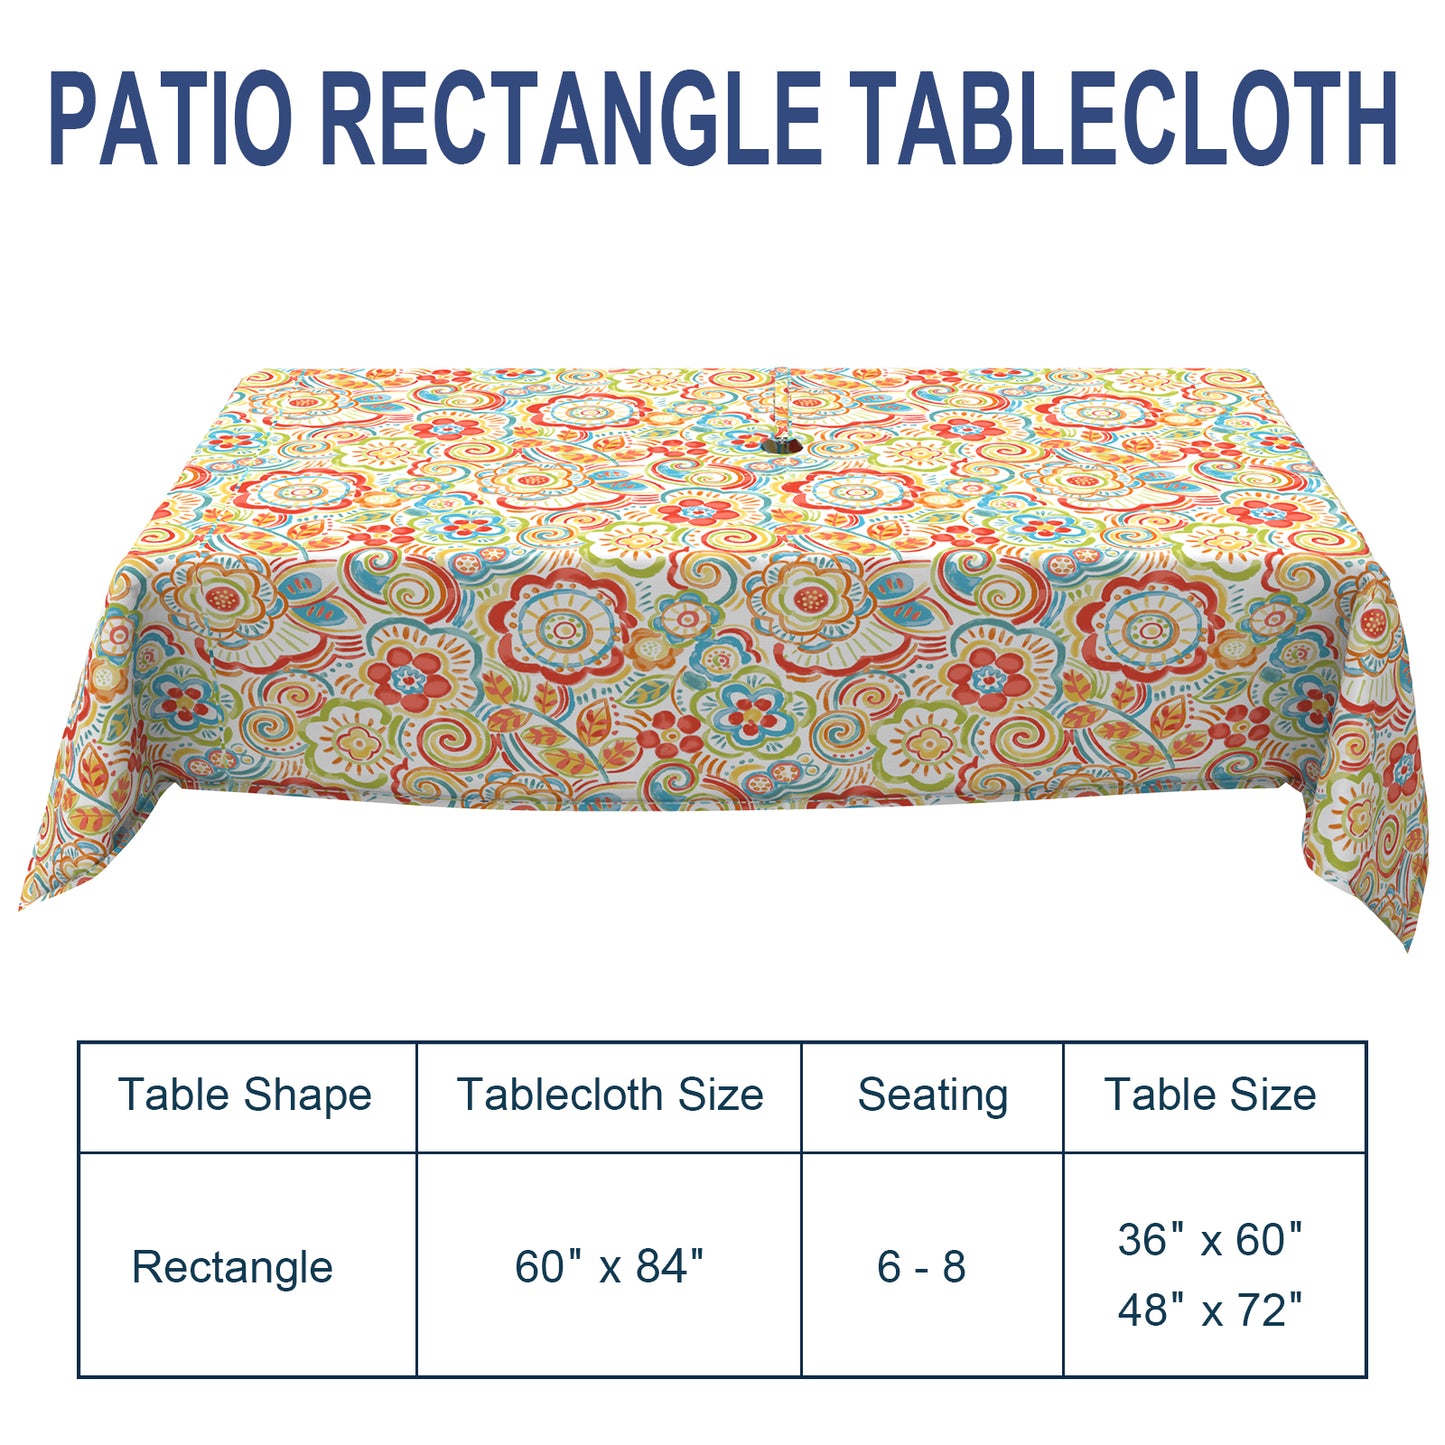 Melody Elephant Outdoor Rectangle Tablecloth, 60×84 Inch Water Repellent Picnic Table Cover with Umbrella Hole Zipper for Patio Family Meal, Flower Multi